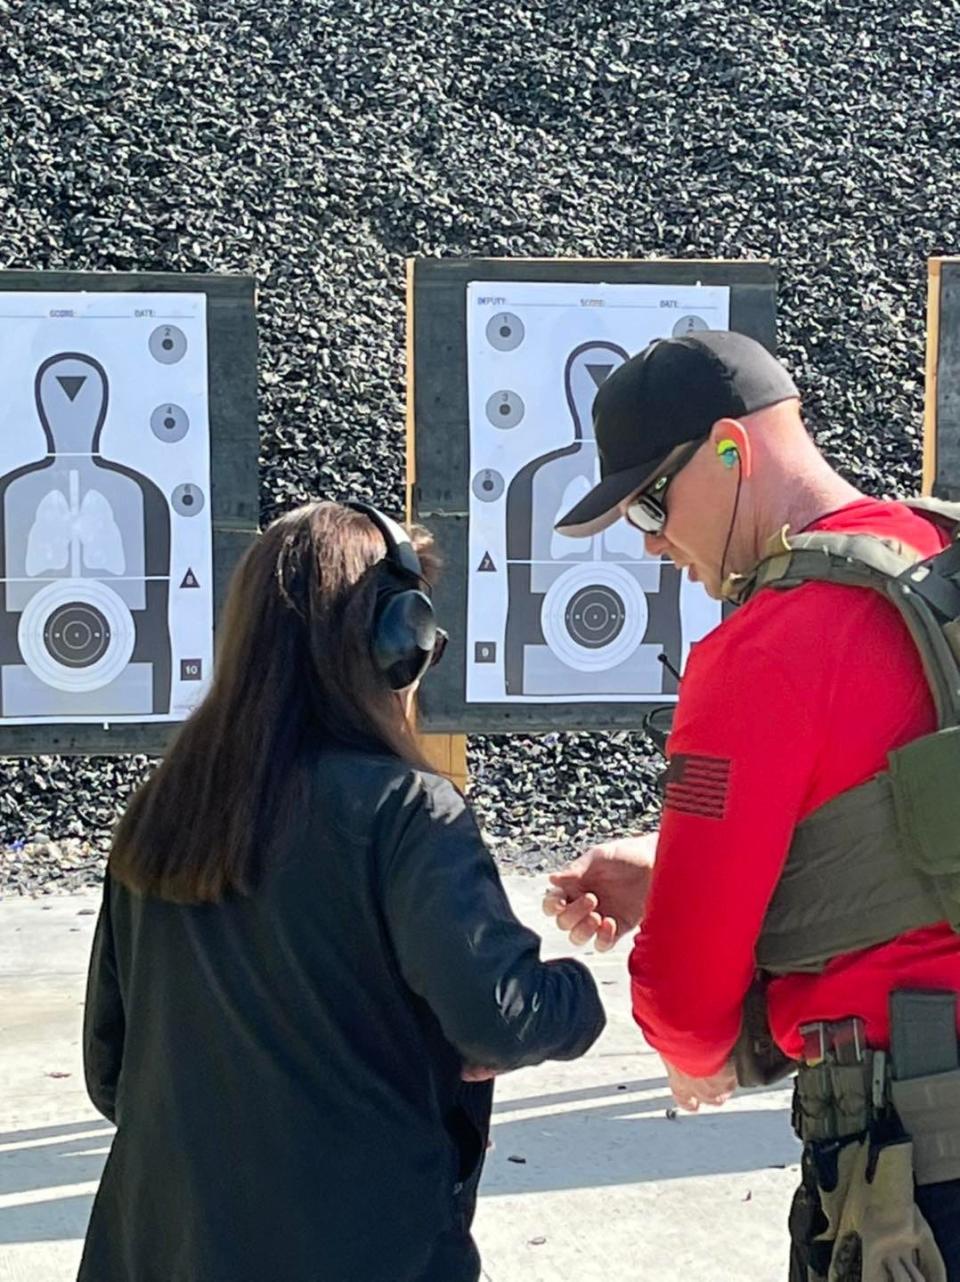 The San Bernardino County Sheriff’s Department has announced the opening of a Victorville office for the public to process concealed carry weapon permits.